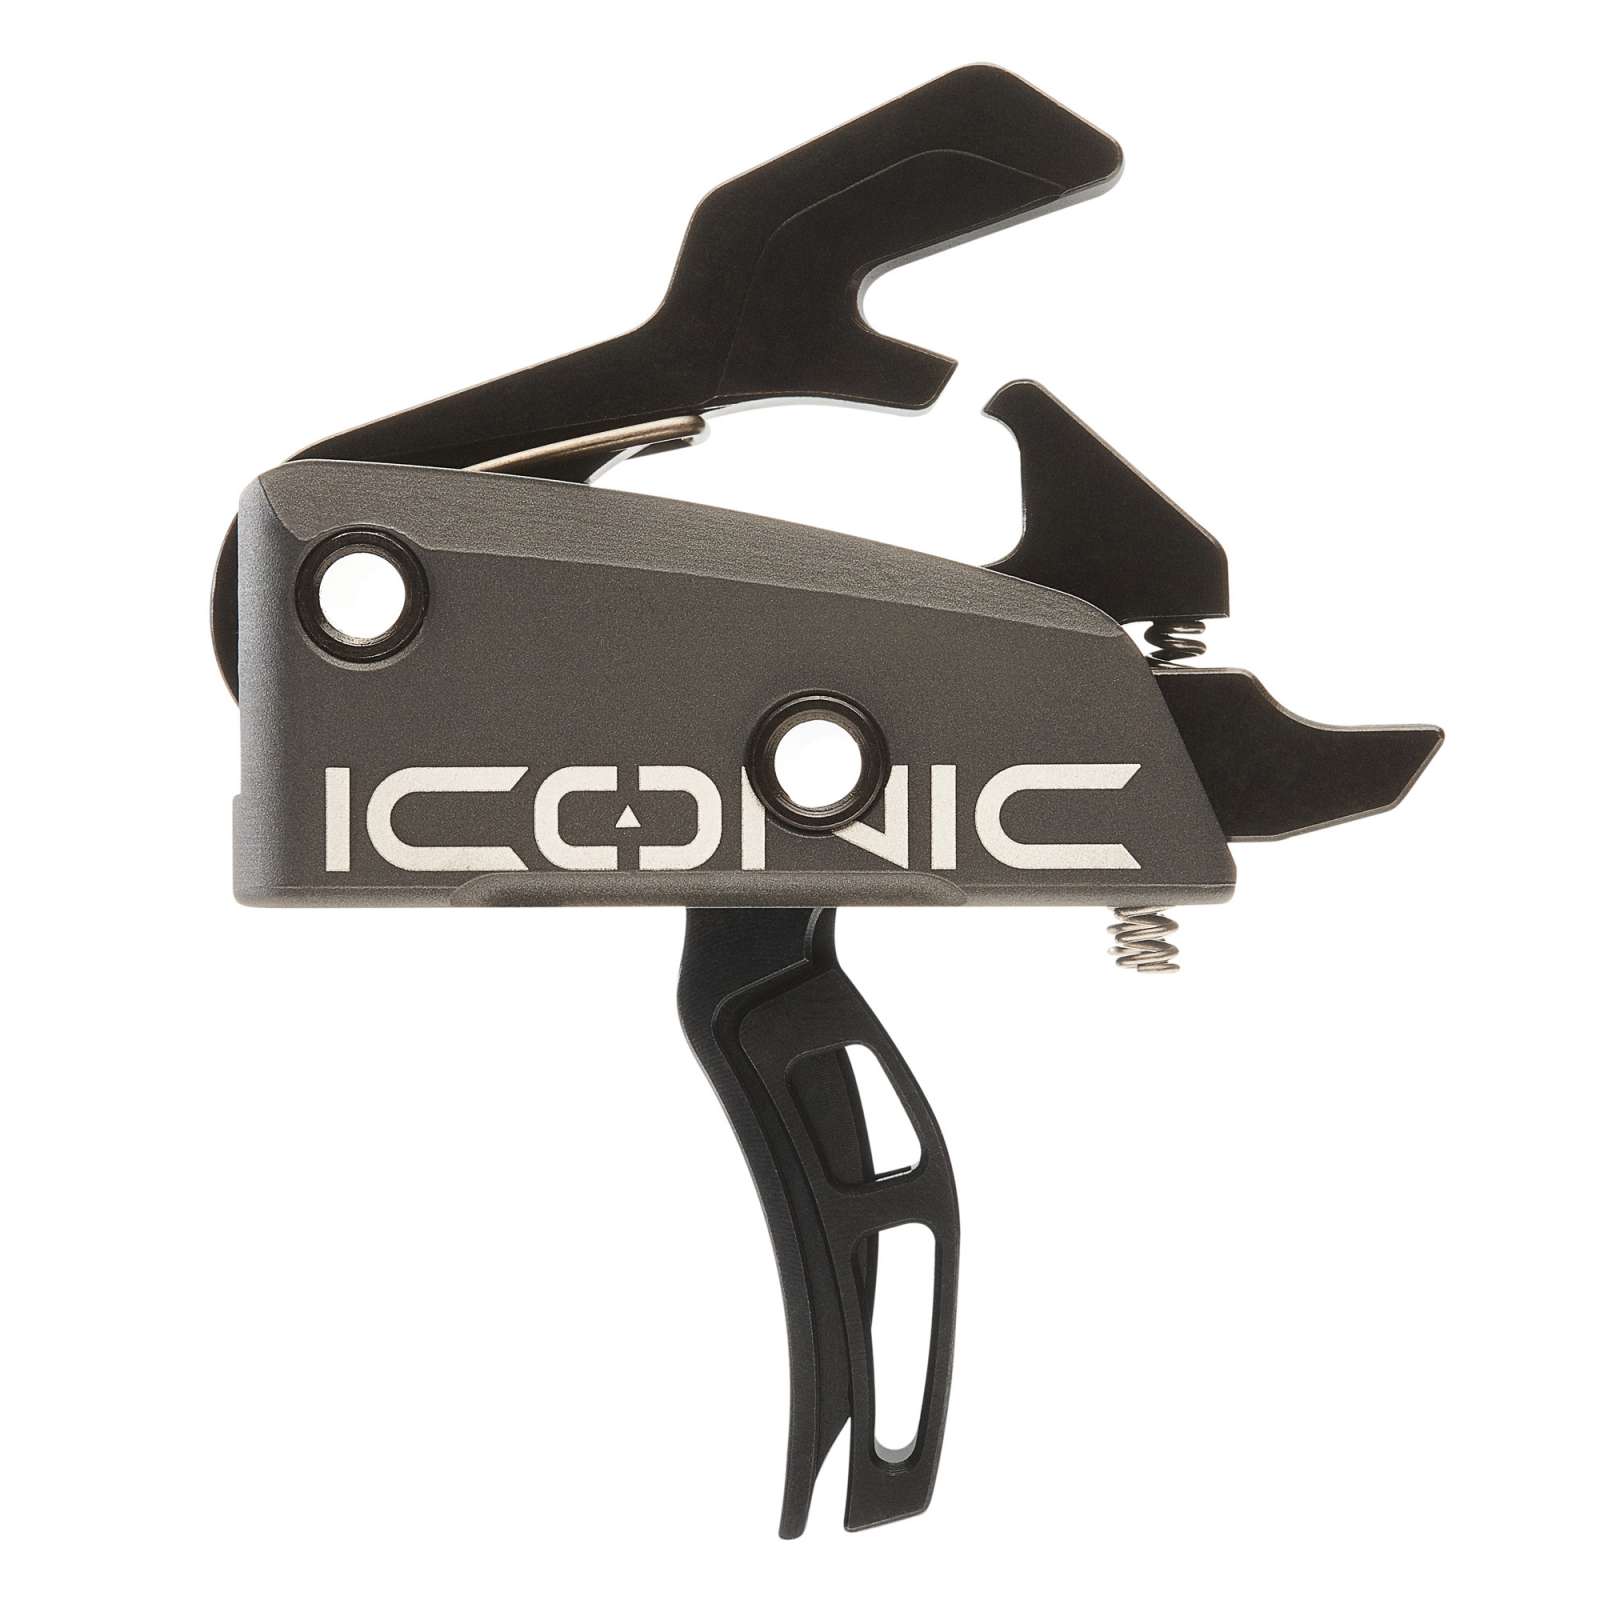 RISE ICONIC DUAL-BLADE TWO-STAGE TRIGGER GRY - Sale